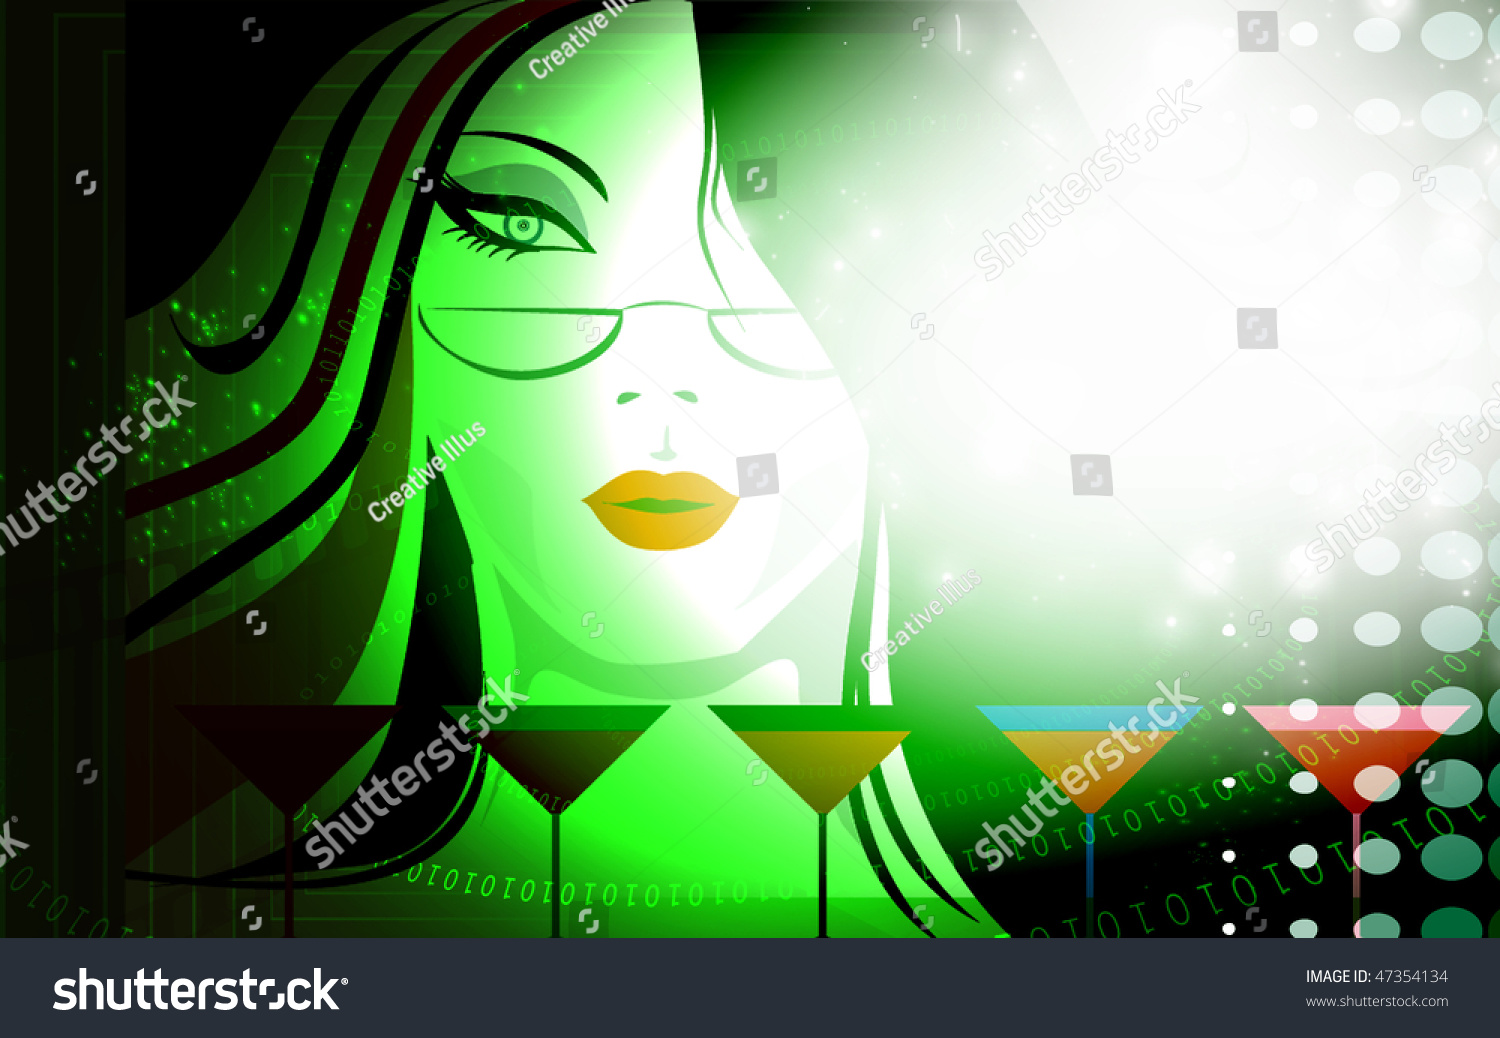 Silhouette Lady Looking Through Spectacles Goblets Stock Illustration 47354134 Shutterstock 